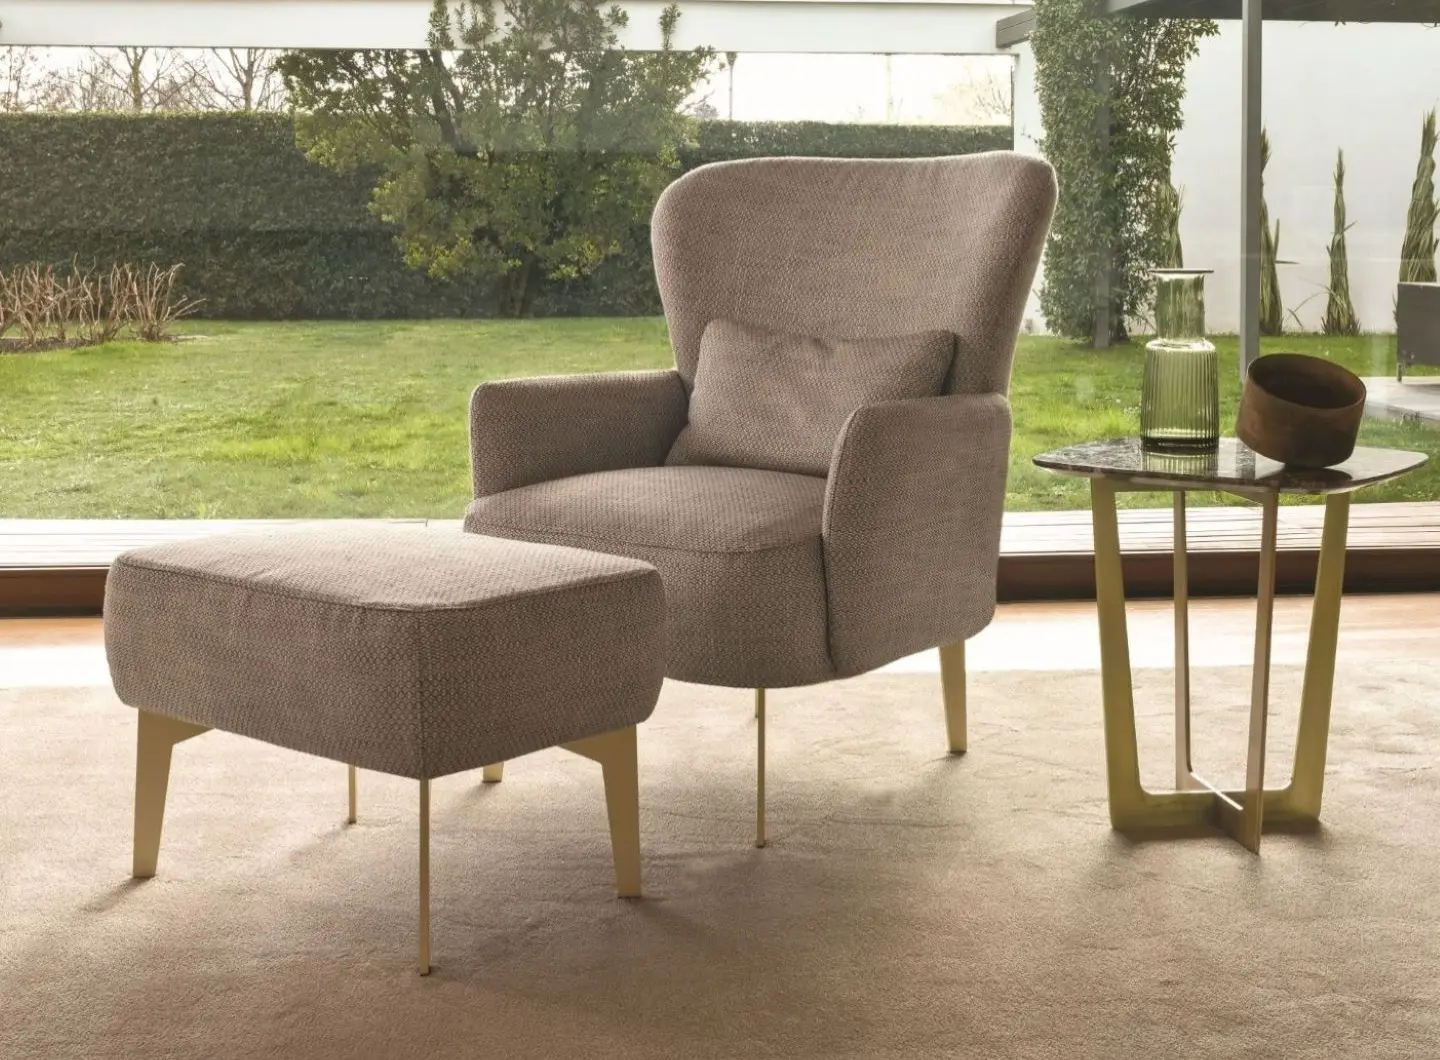 CTS Sofa - Collection Ginevra and coffee table Charme.